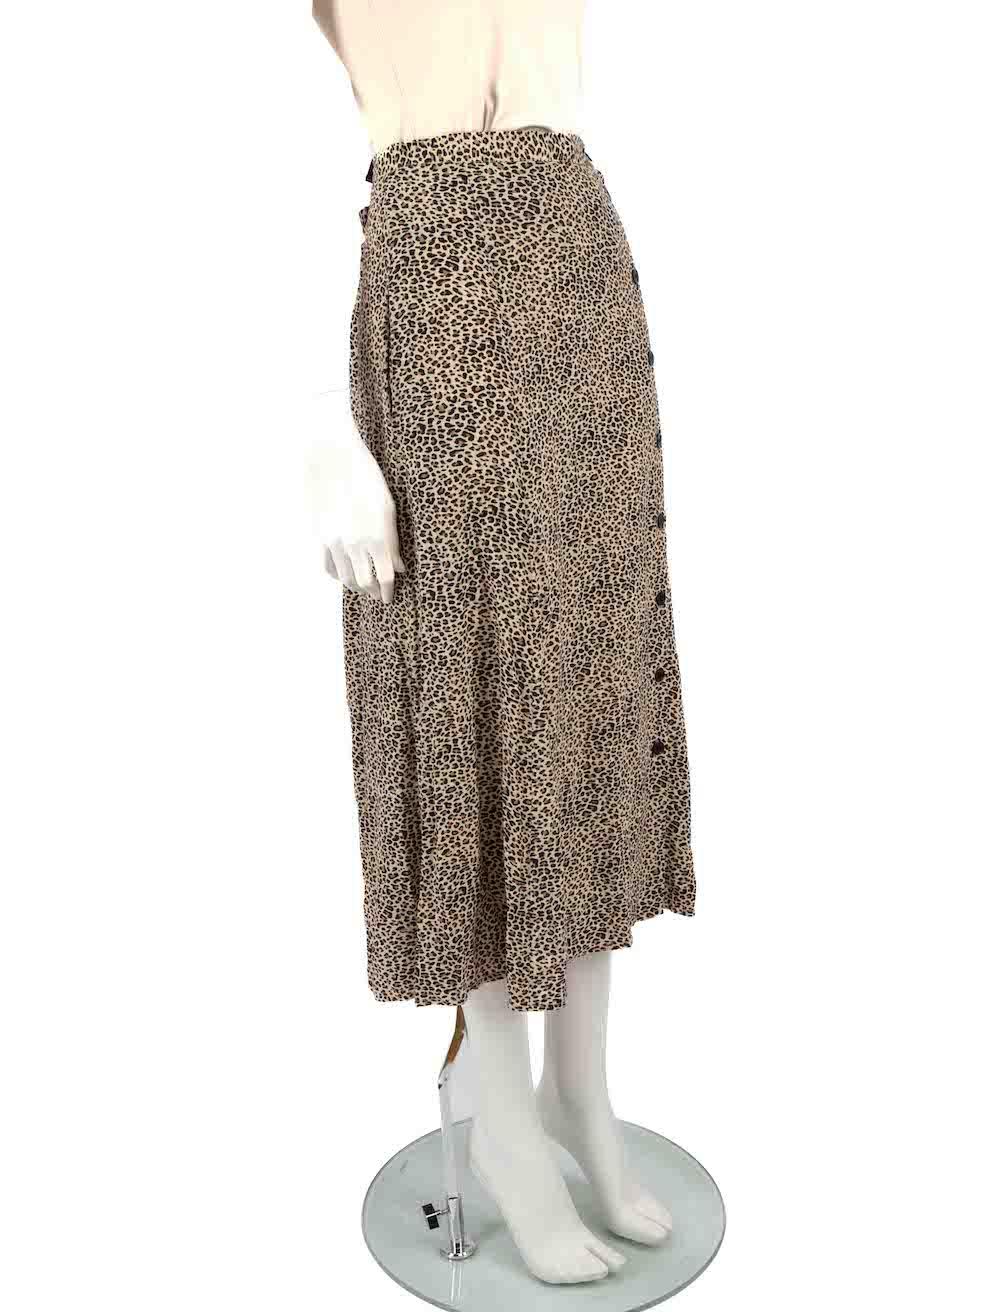 CONDITION is Never worn. No visible wear to skirt is evident on this new Zadig & Voltaire designer resale item. 
 
 Details
 June Print Leo model
 Brown
 Viscose
 Midi skirt
 Leopard print pattern
 Front button up closure
 Elasticated back